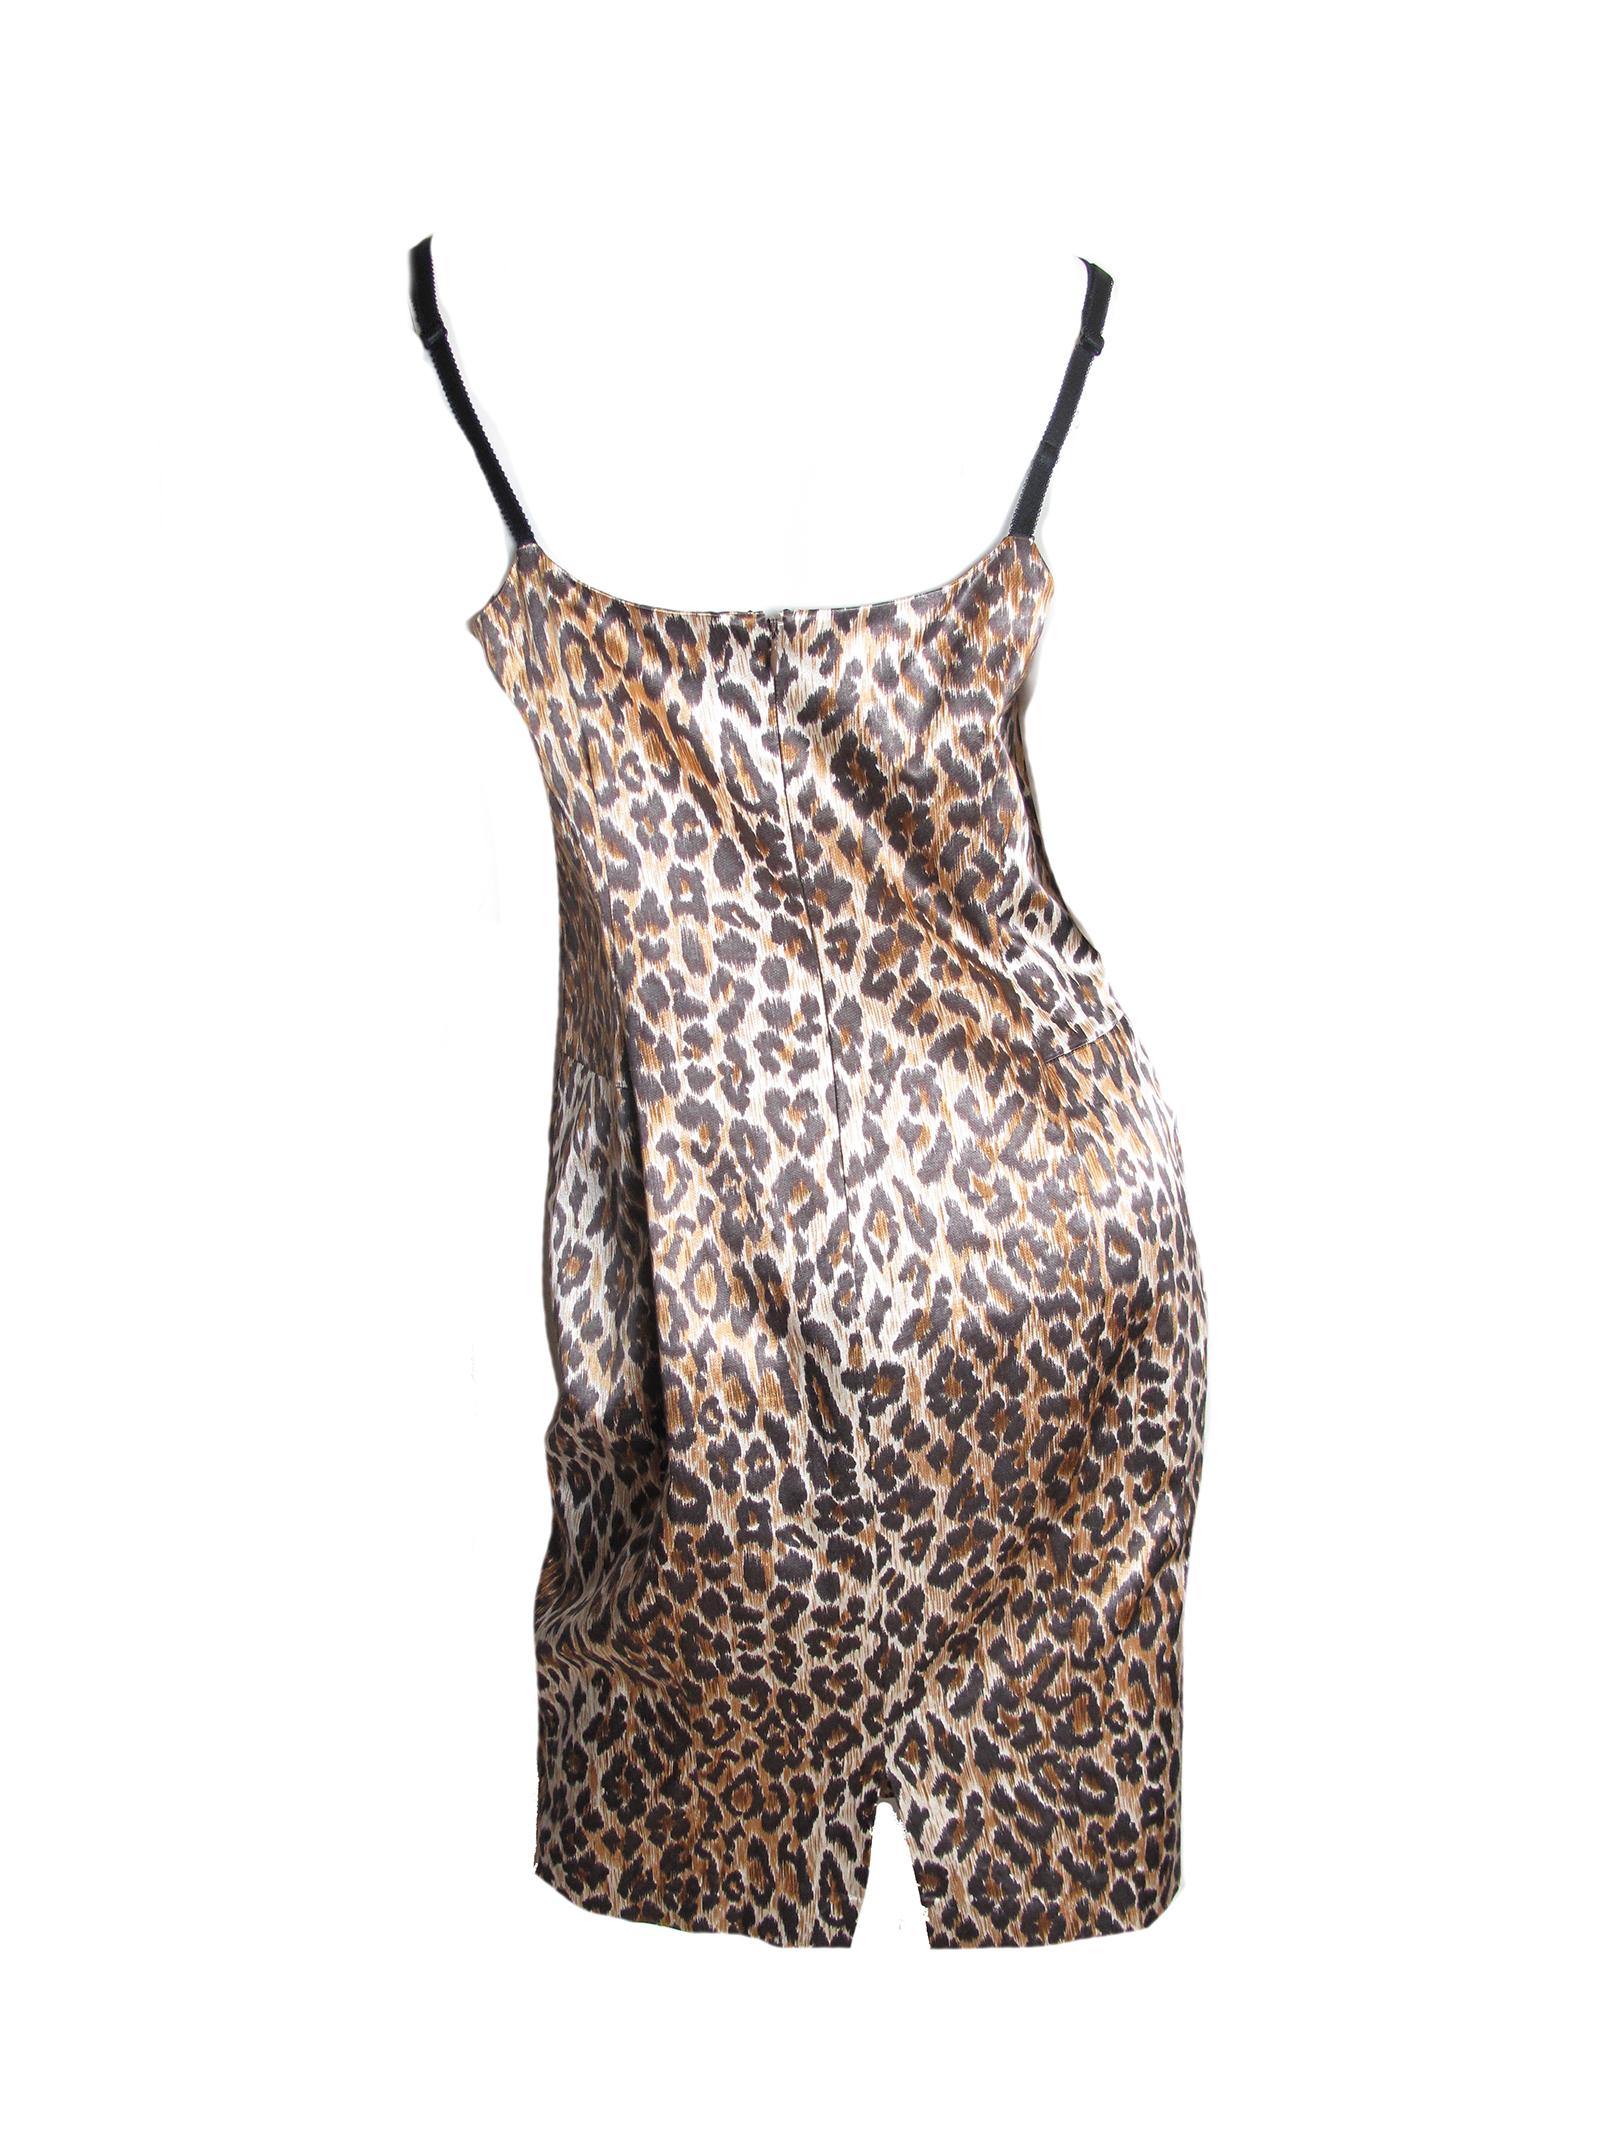 D & G leopard slip dress. Cotton, viscose - has stretch. Condition: Excellent.  Size 48 / US 12
We accept returns for refund.  We offer free ground shipping within the US.  Please let us know if you have any questions. 